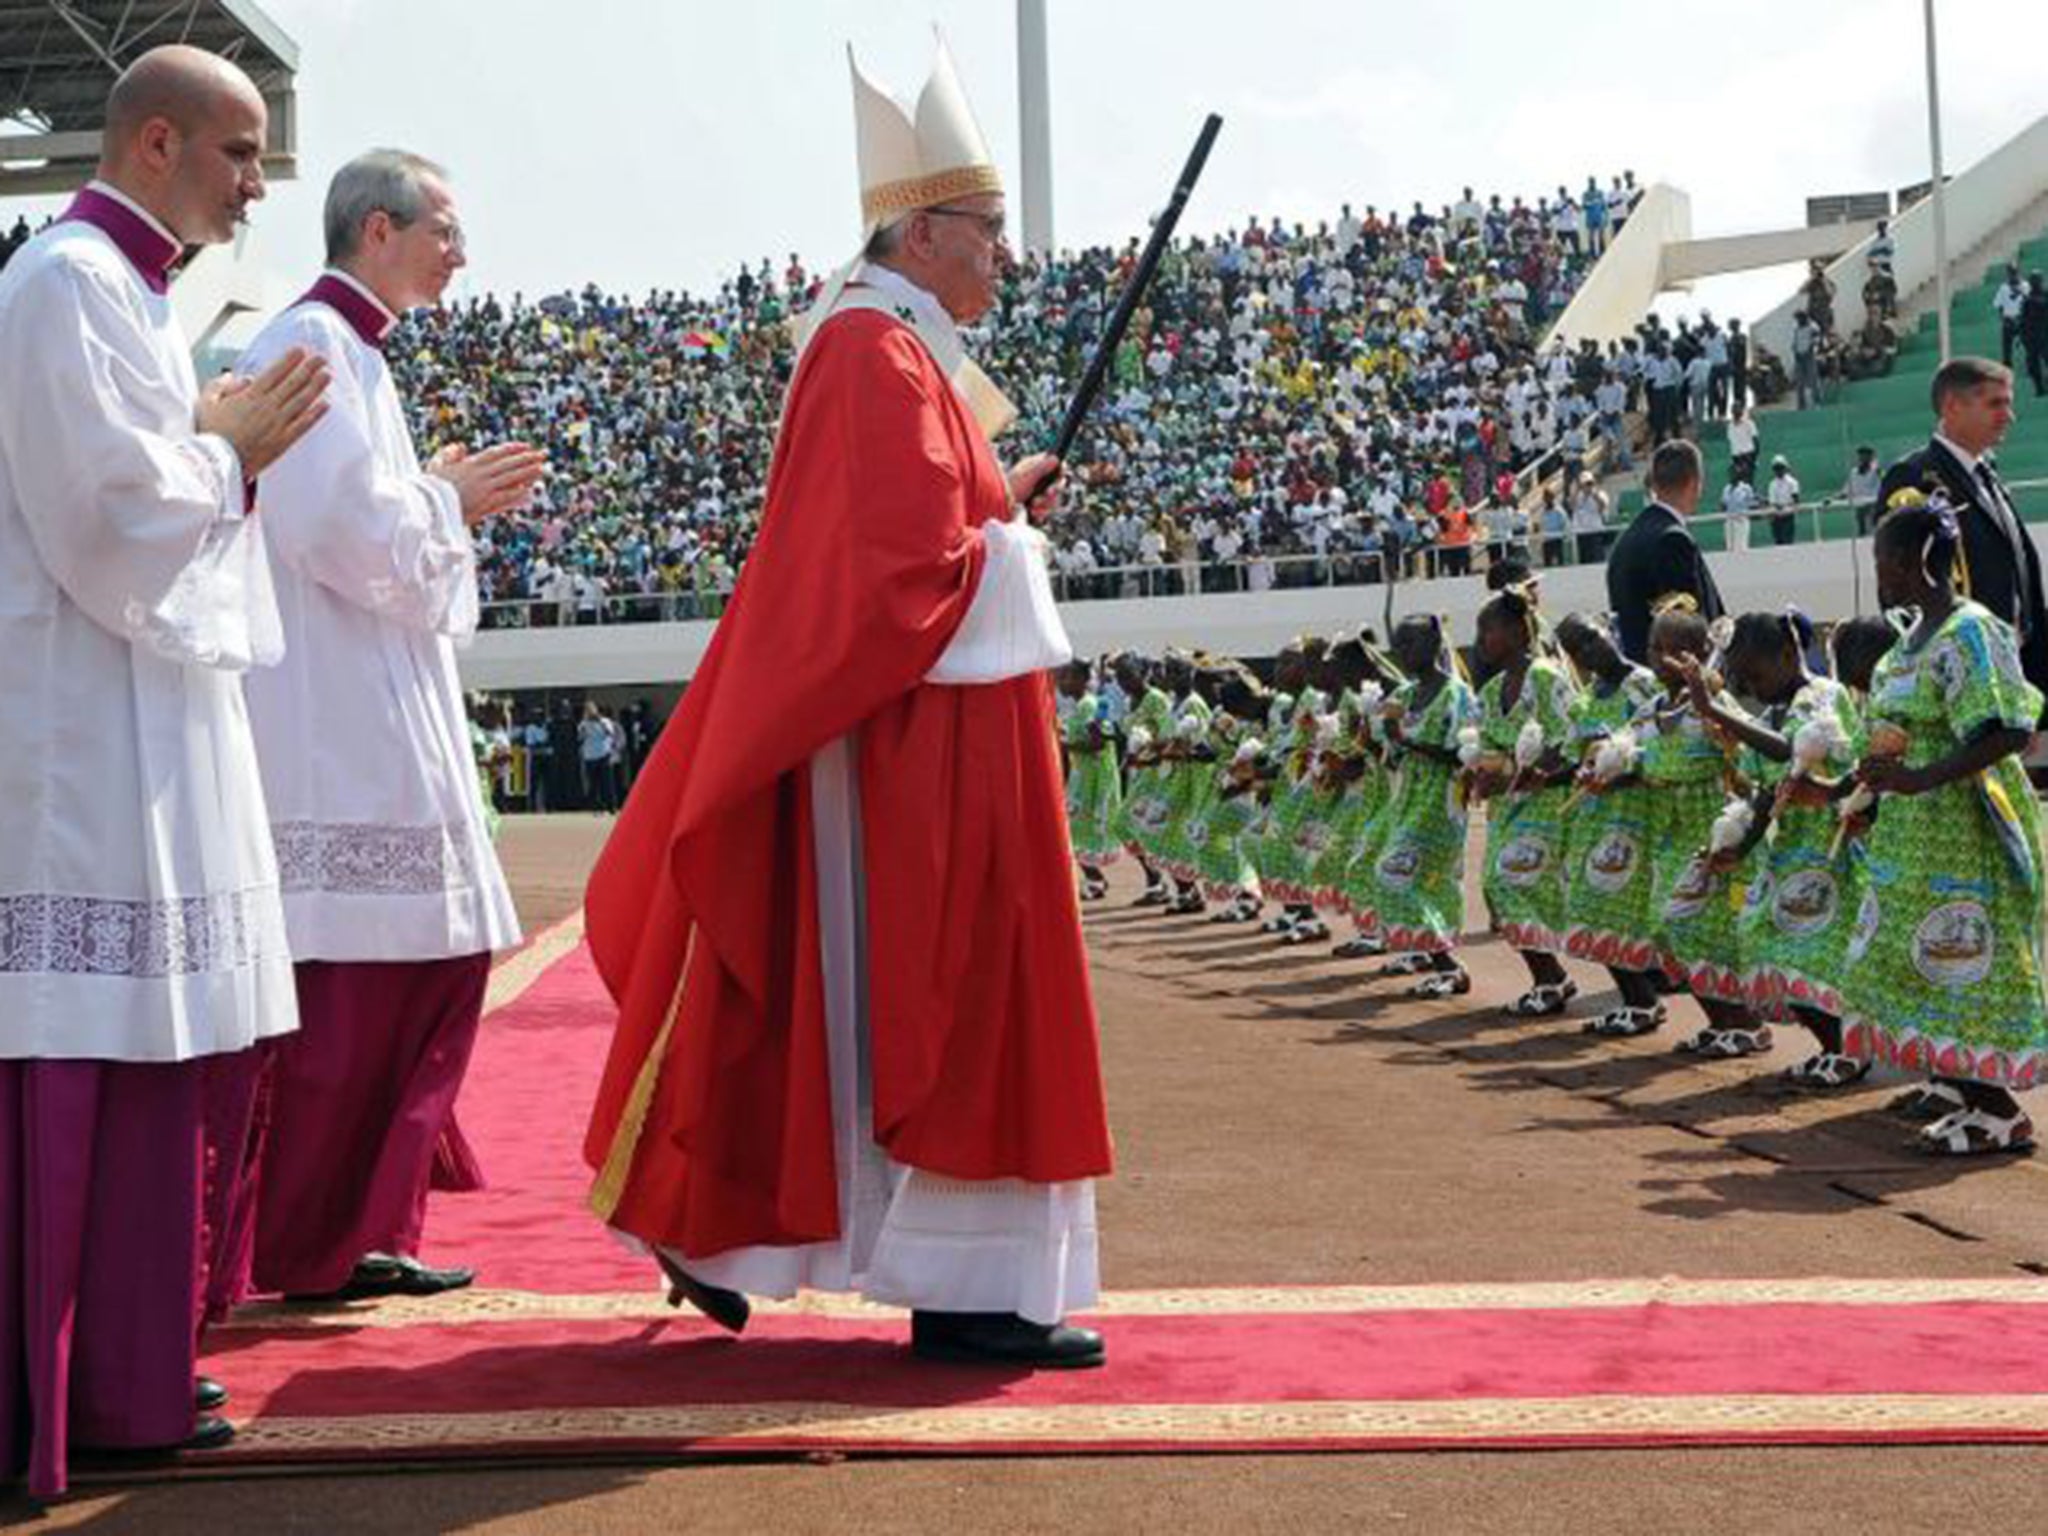 Pope Francis celebrates Mass at Bangui Stadium in the Central African Republic